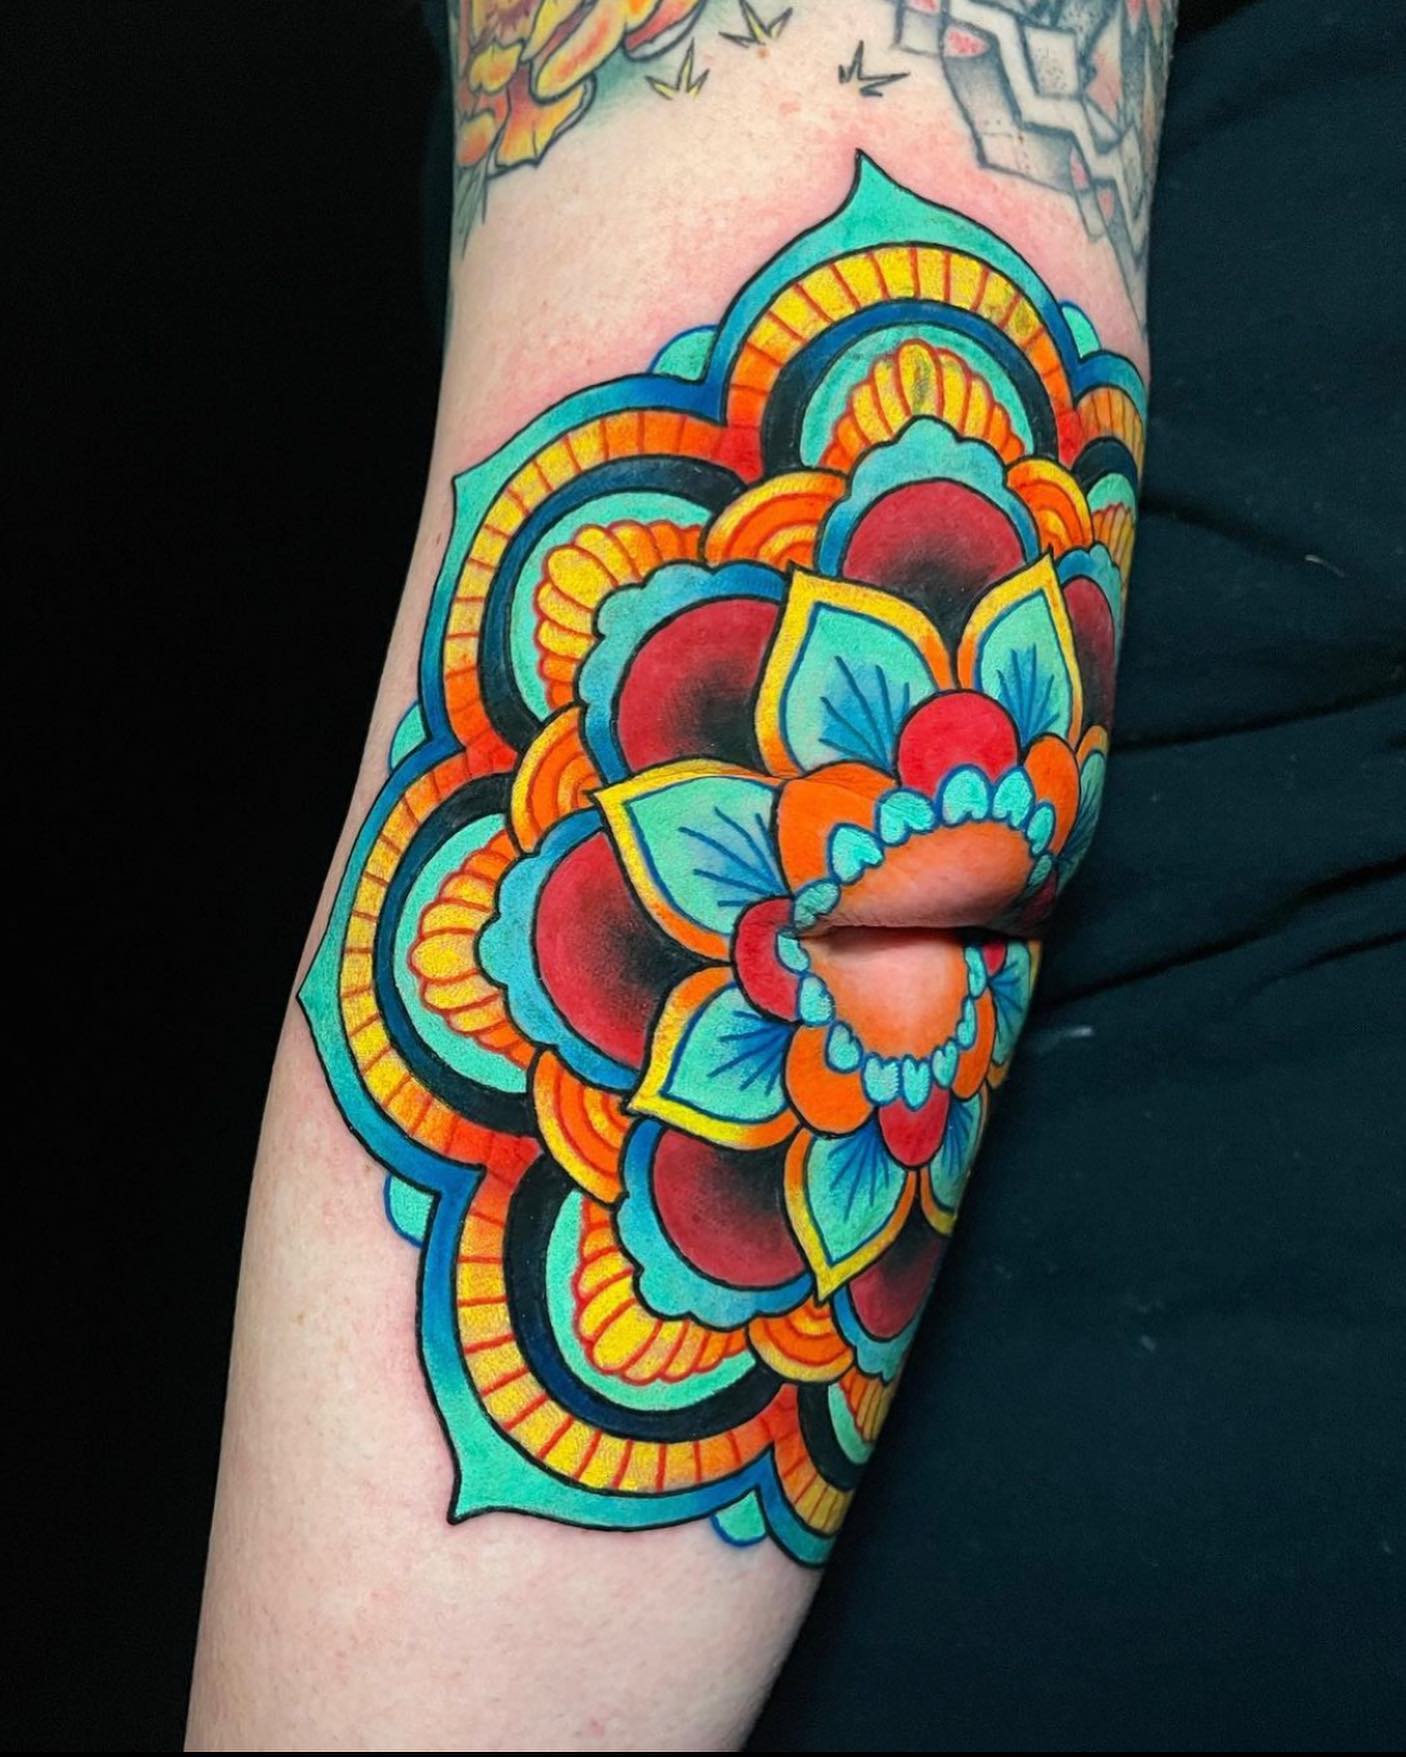 Bright mandala tattoos are for those who are creative and naturally driven by nature, as well as their surroundings. Show off this color combo if you have a detail-oriented side.